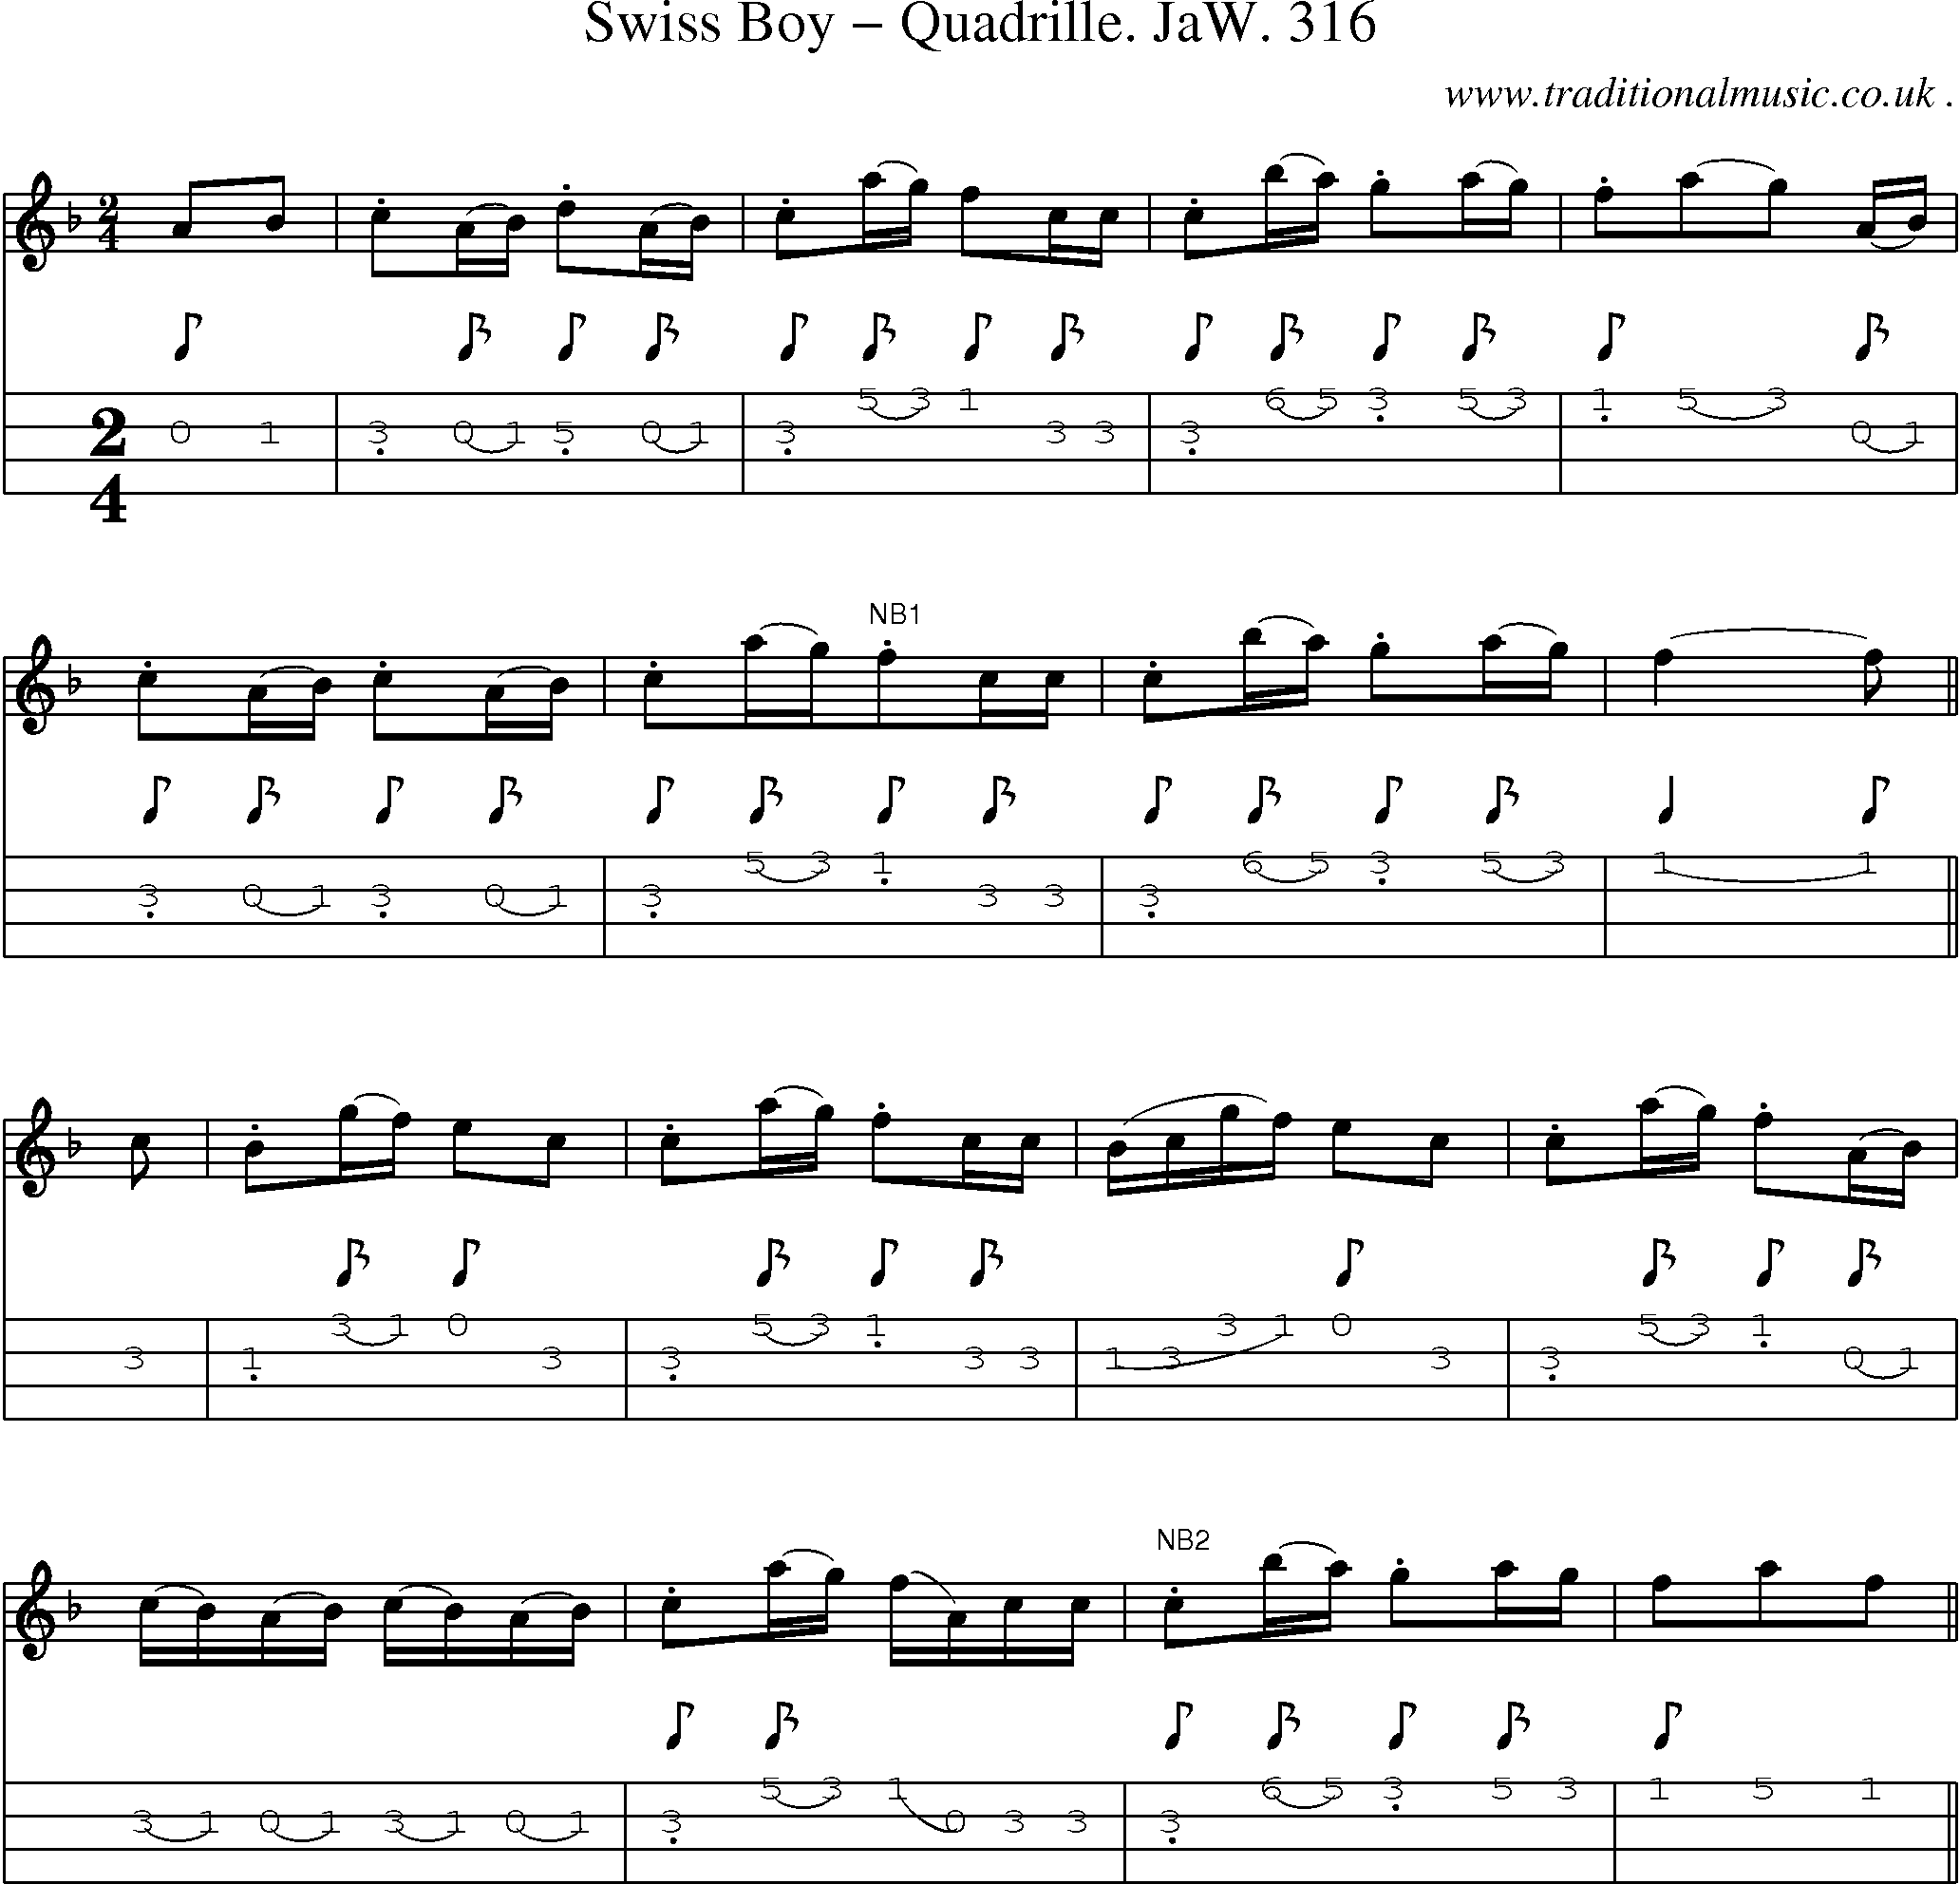 Sheet-Music and Mandolin Tabs for Swiss Boy Quadrille Jaw 316